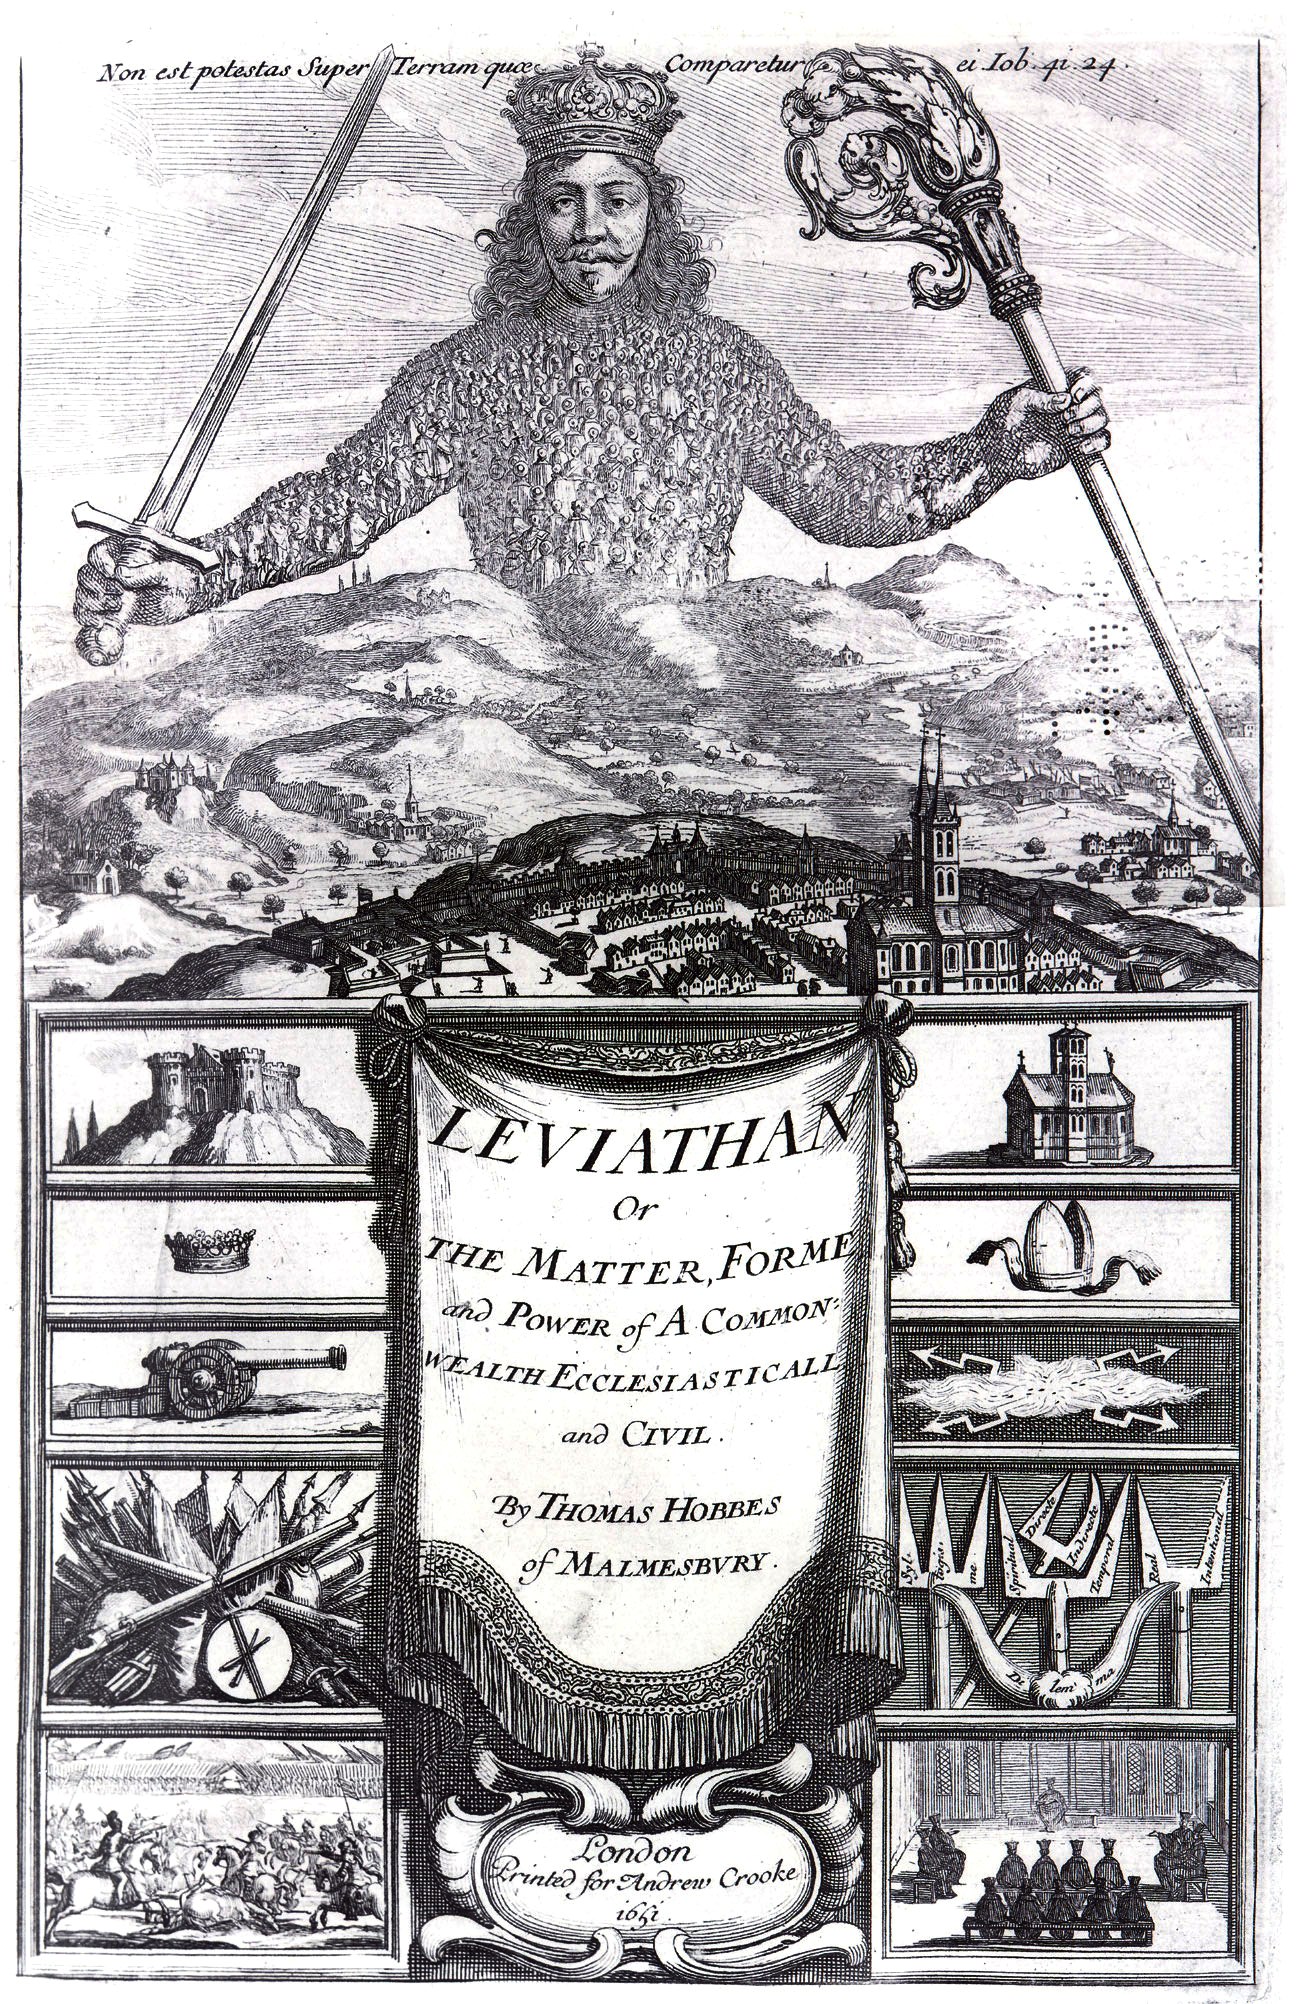 The Logic of Flags (Leviathan by Thomas Hobbes. Source: https://commons.wikimedia.org/wiki/File%3ALeviathan_by_Thomas_Hobbes.jpg)